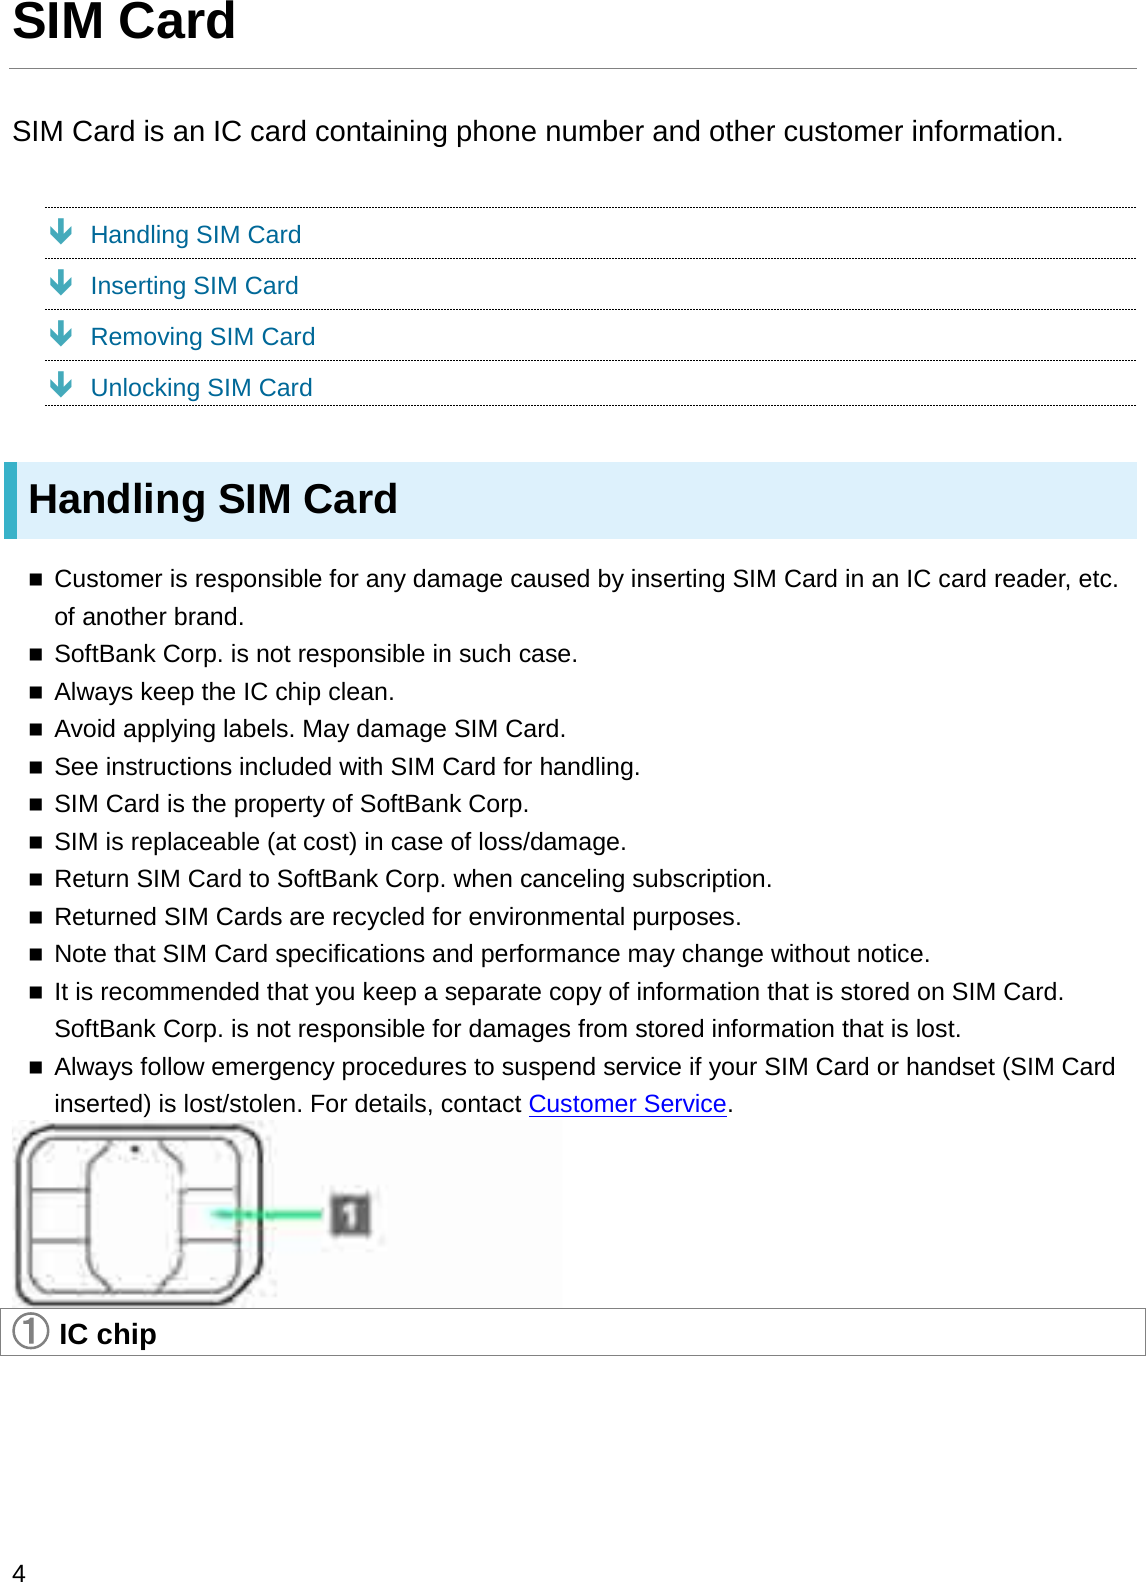 SIM CardSIM Card is an IC card containing phone number and other customer information.ÐHandling SIM CardÐInserting SIM CardÐRemoving SIM CardÐUnlocking SIM CardHandling SIM CardCustomer is responsible for any damage caused by inserting SIM Card in an IC card reader, etc. of another brand.SoftBank Corp. is not responsible in such case.Always keep the IC chip clean.Avoid applying labels. May damage SIM Card.See instructions included with SIM Card for handling.SIM Card is the property of SoftBank Corp.SIM is replaceable (at cost) in case of loss/damage.Return SIM Card to SoftBank Corp. when canceling subscription.Returned SIM Cards are recycled for environmental purposes.Note that SIM Card specifications and performance may change without notice.It is recommended that you keep a separate copy of information that is stored on SIM Card. SoftBank Corp. is not responsible for damages from stored information that is lost.Always follow emergency procedures to suspend service if your SIM Card or handset (SIM Card inserted) is lost/stolen. For details, contact Customer Service.䐟IC chip4